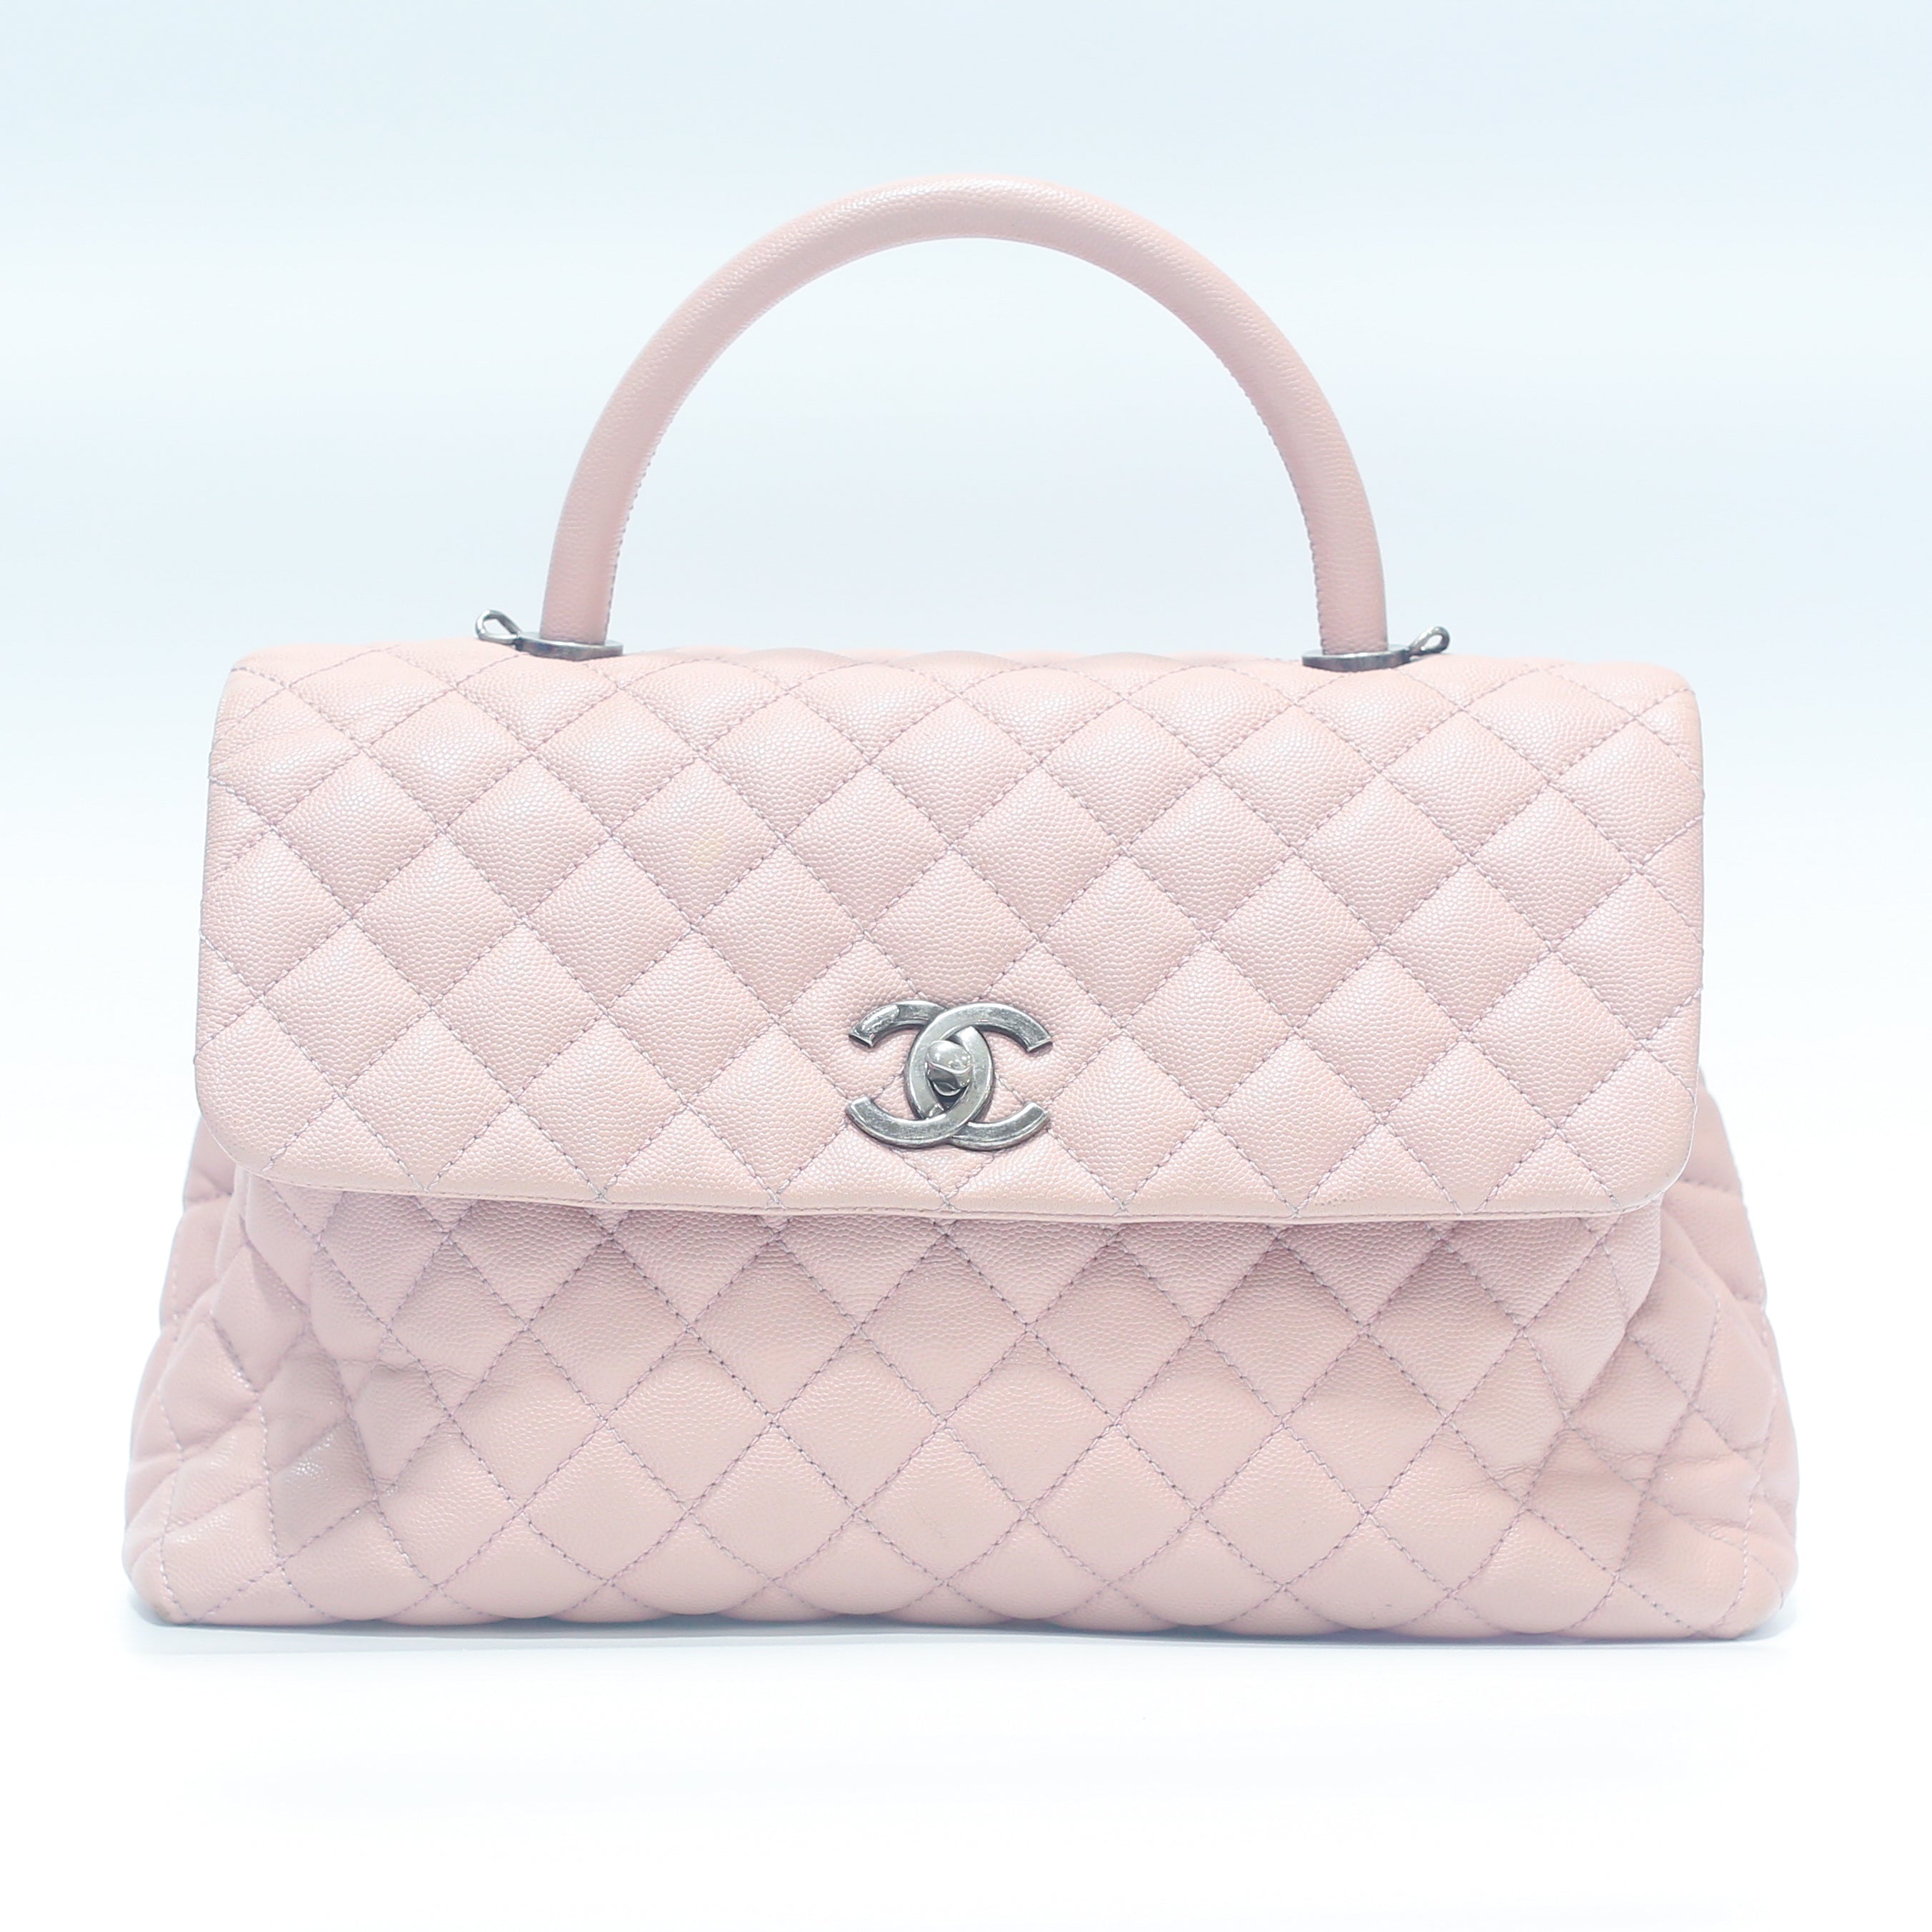 Chanel Coco Handle Bag Reference Guide